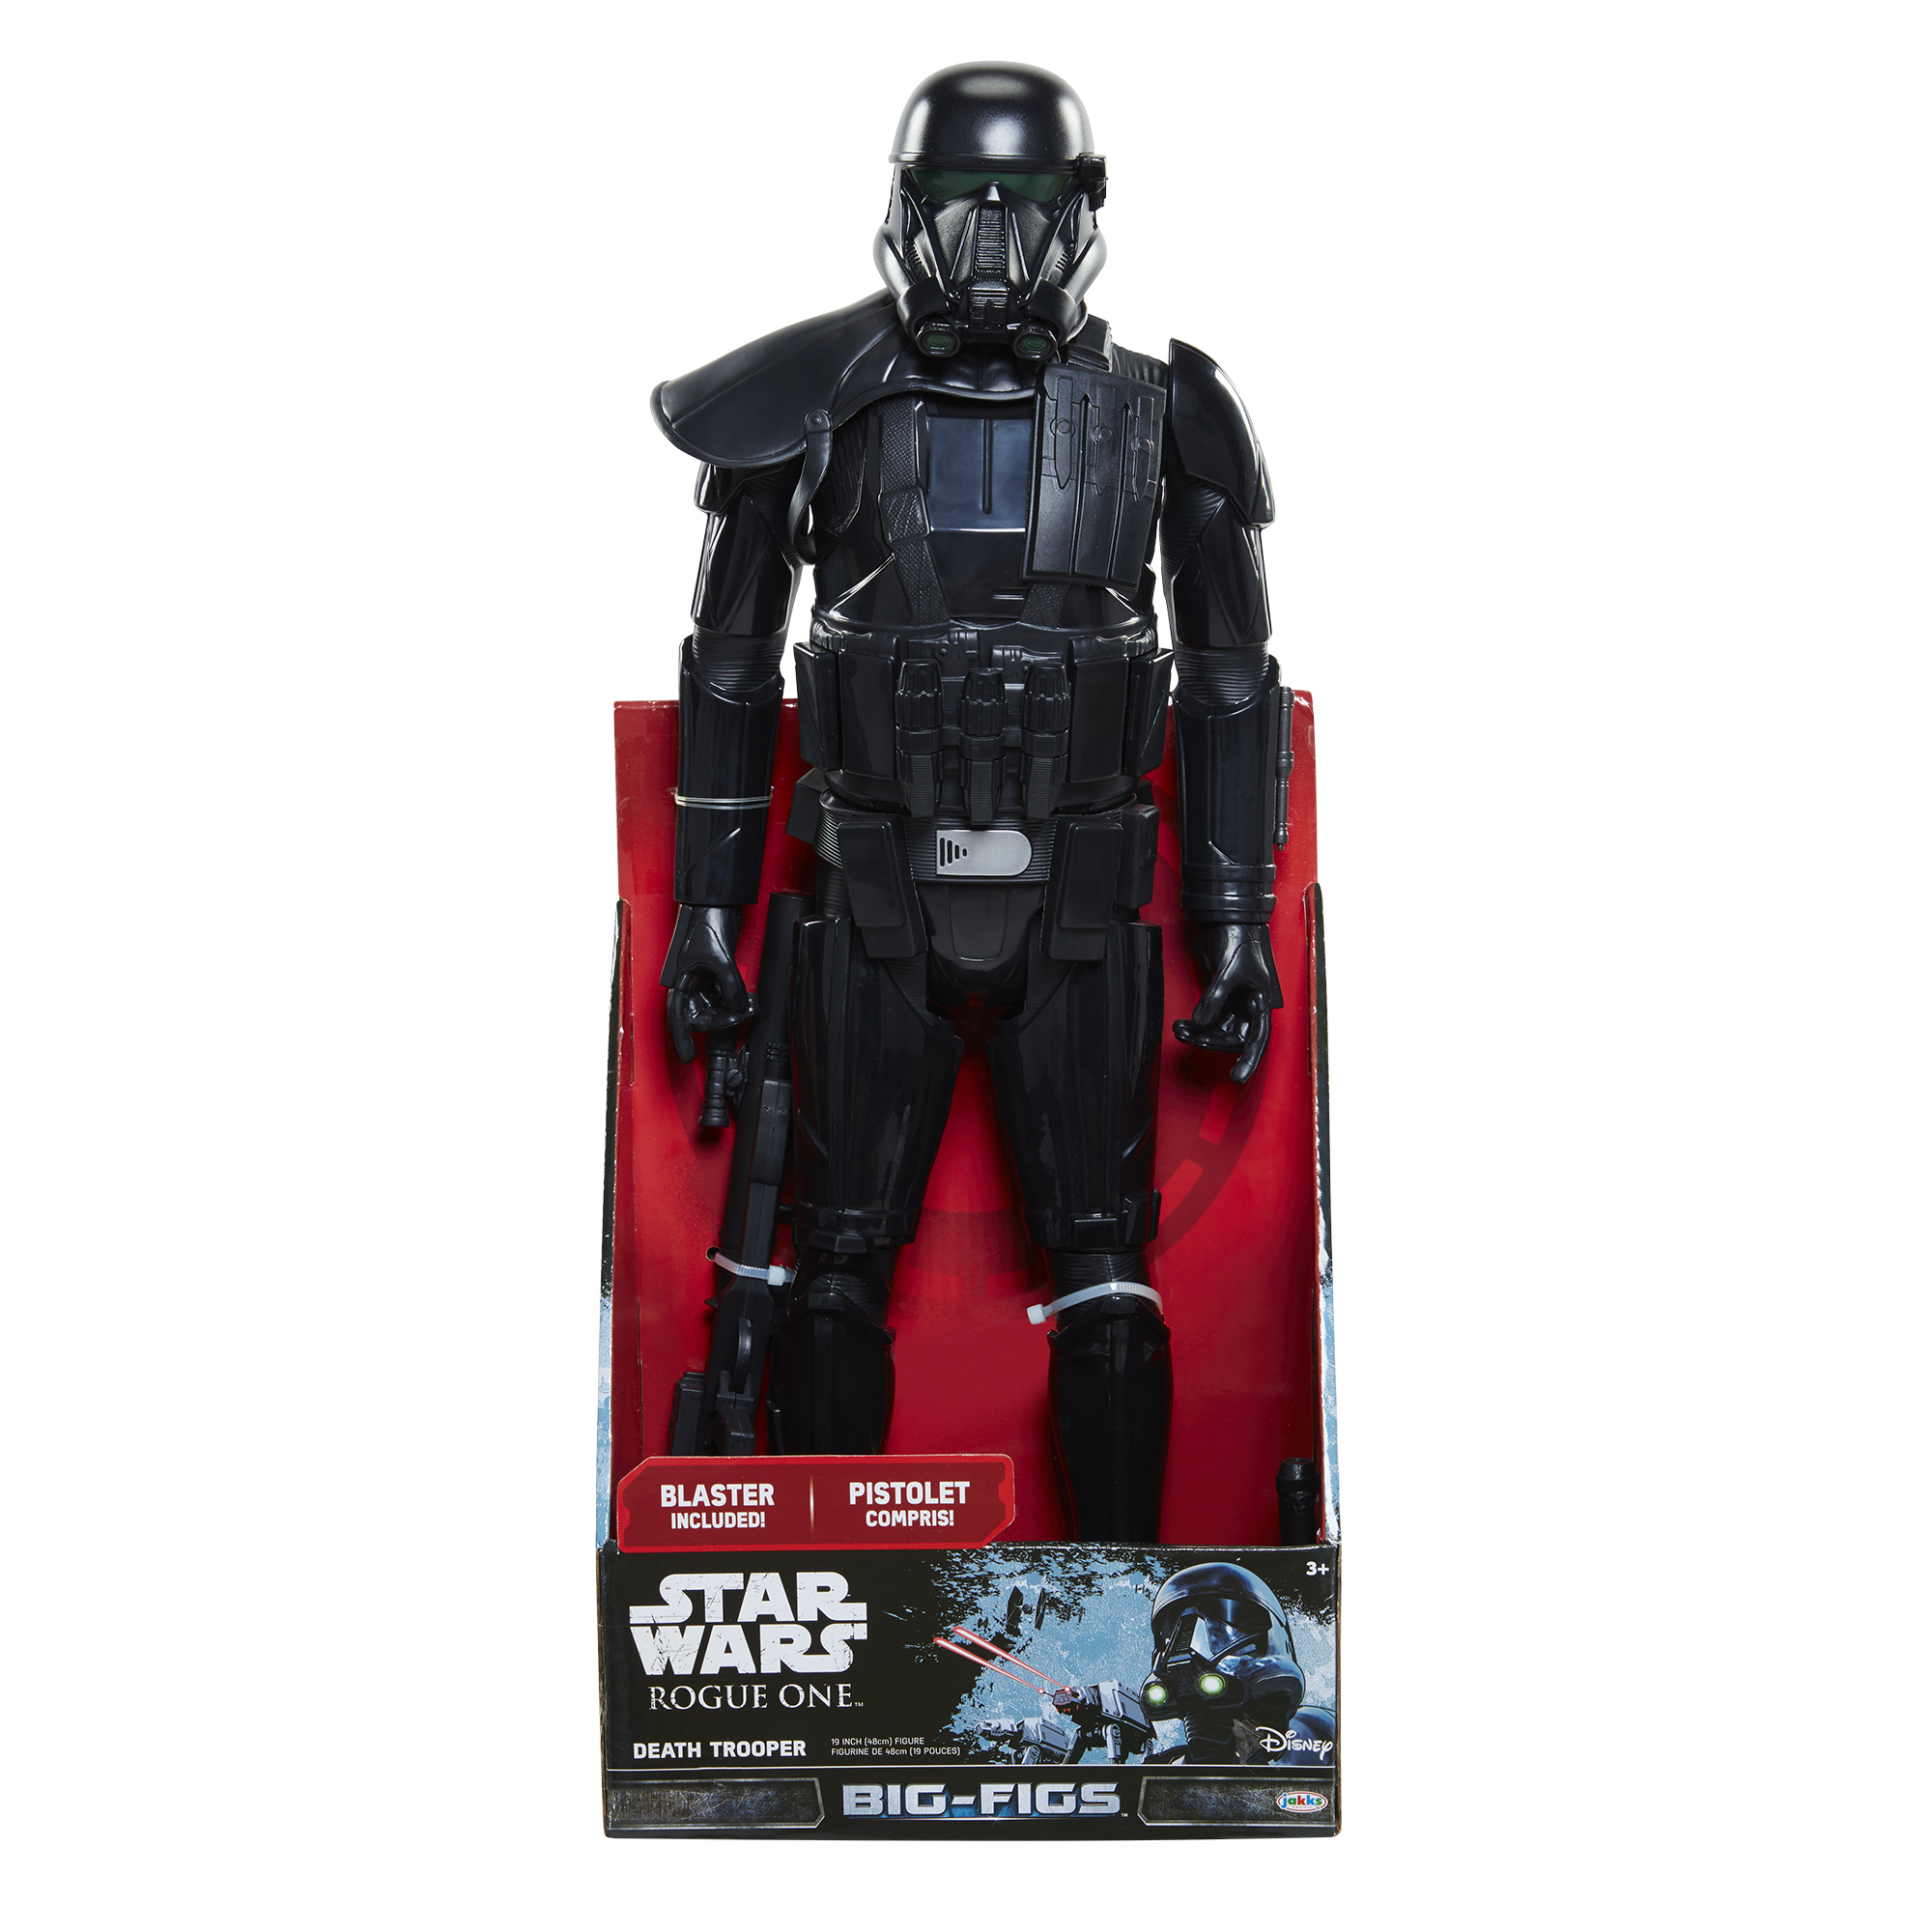 PHOTO: A "Rogue One: A Star Wars Story" deathtrooper action figure from Jakks Pacific is seen here.